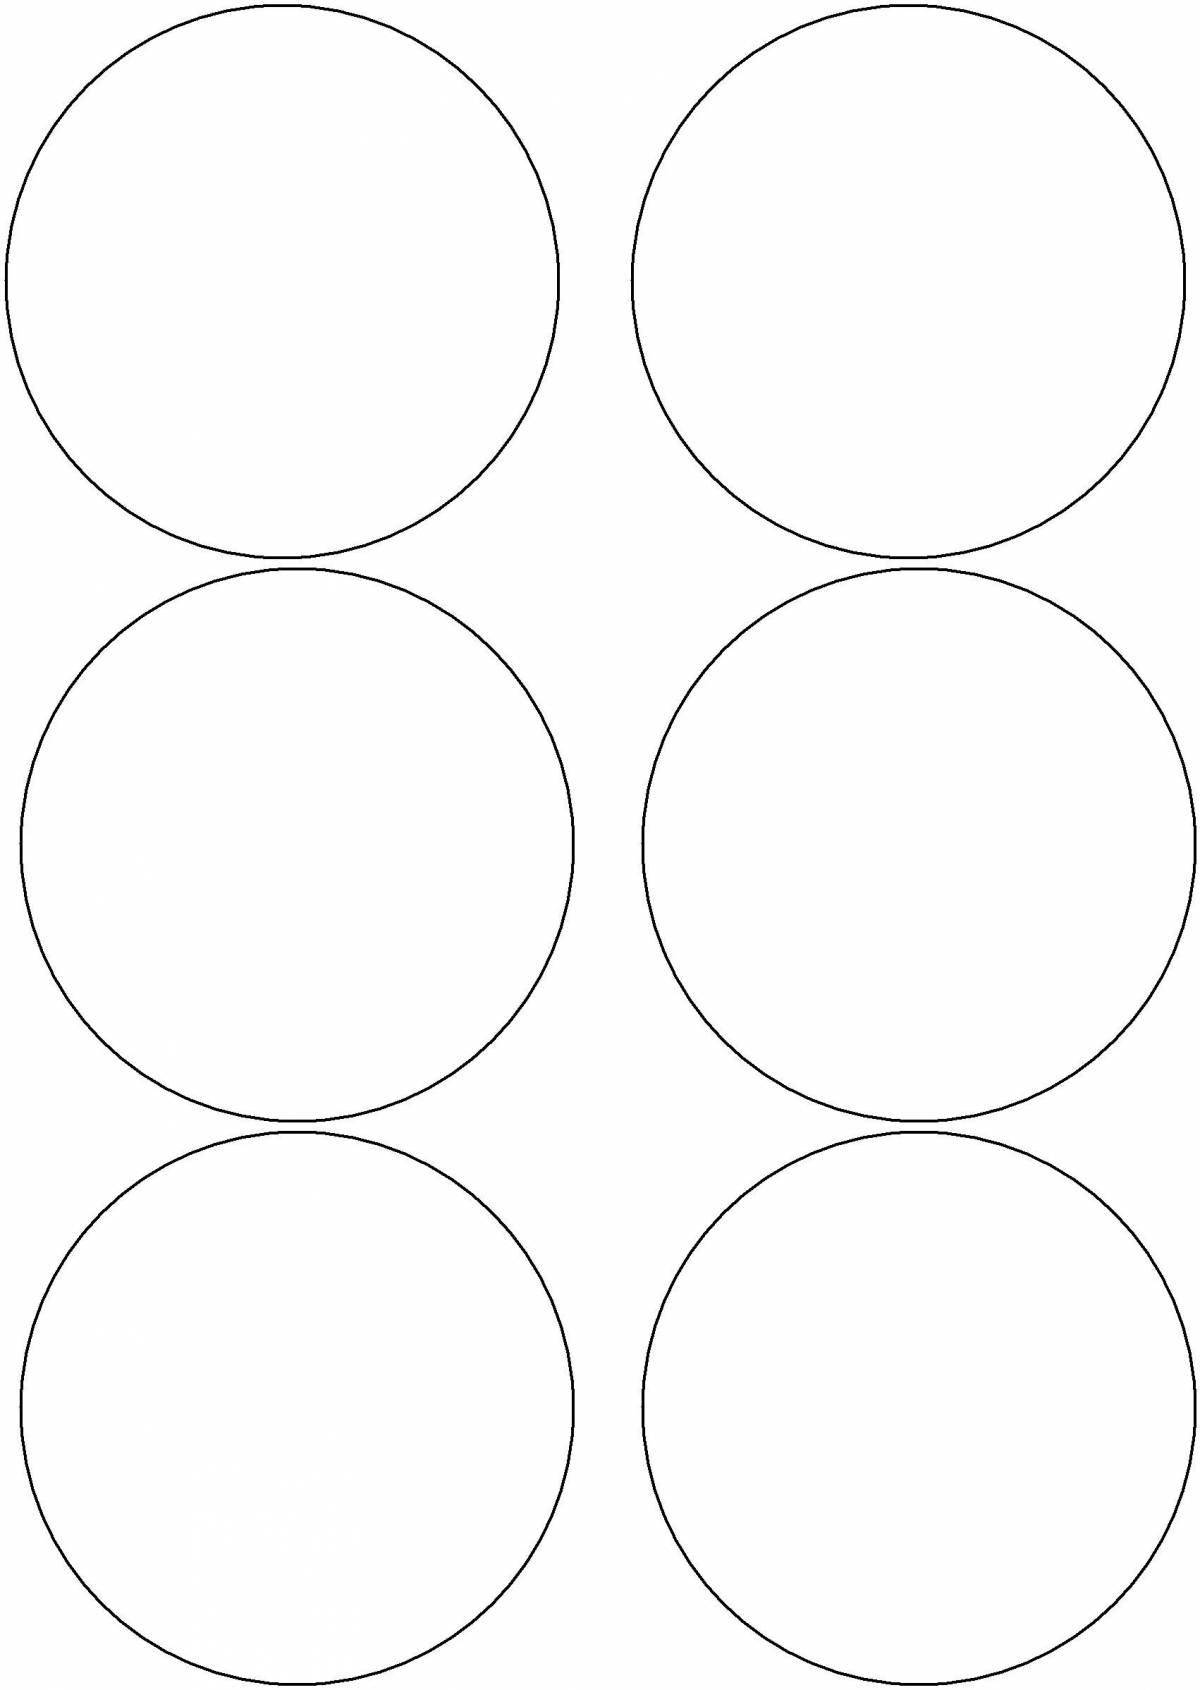 Amazing circle coloring page